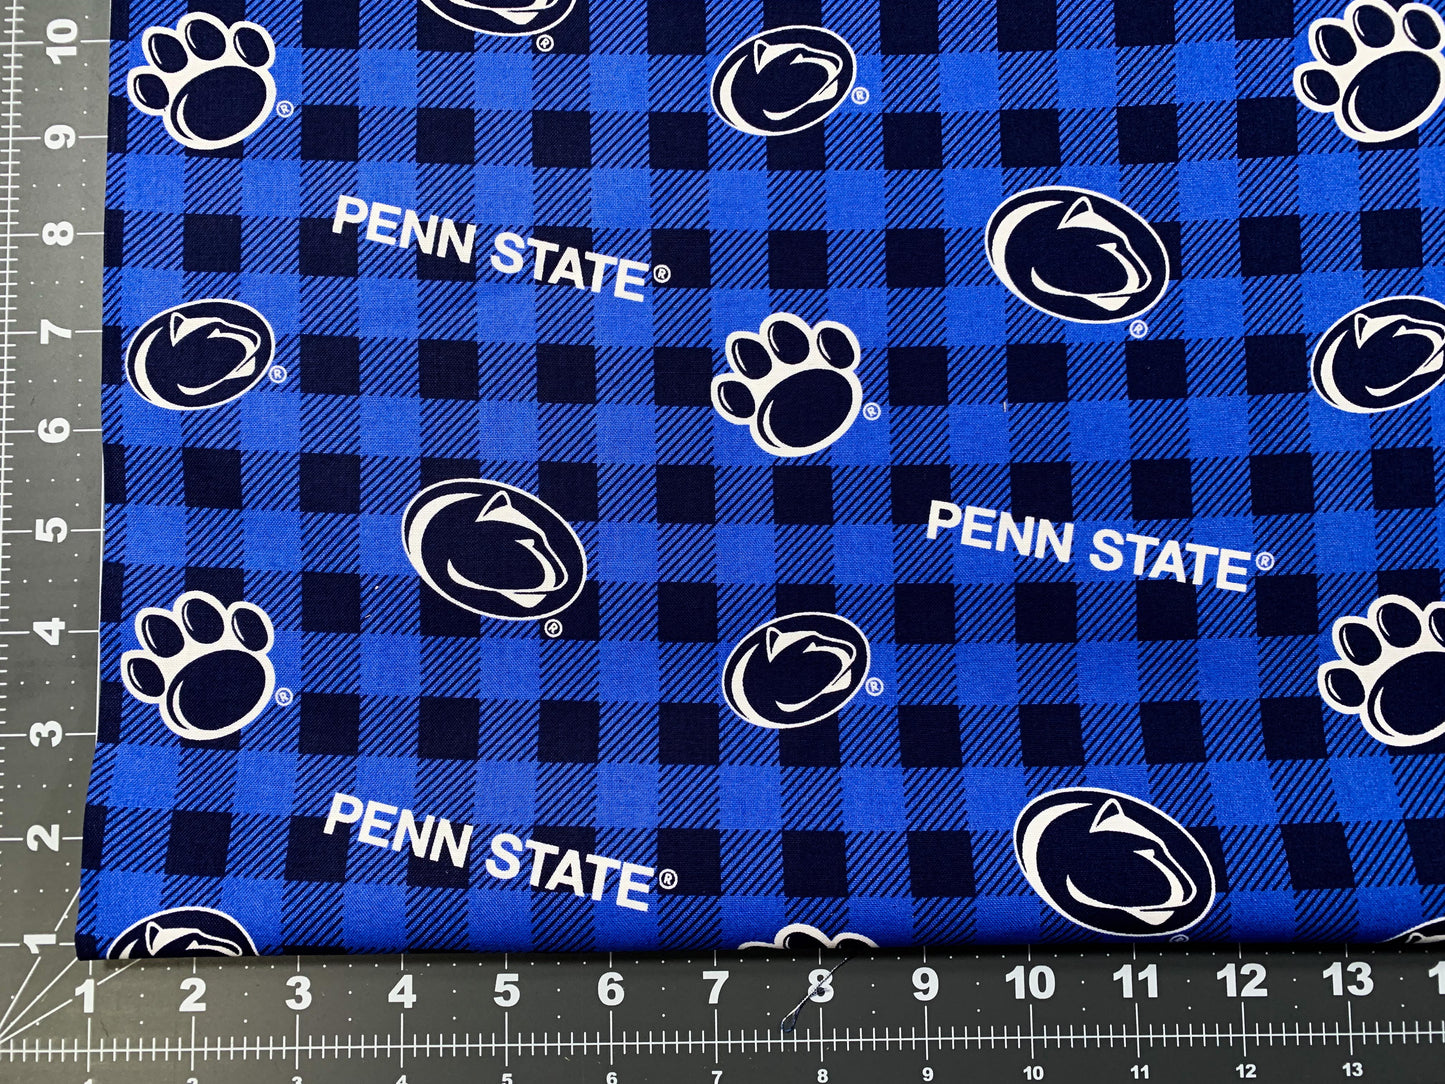 Plaid Penn State fabric PS1207 Nittany Lion fabric